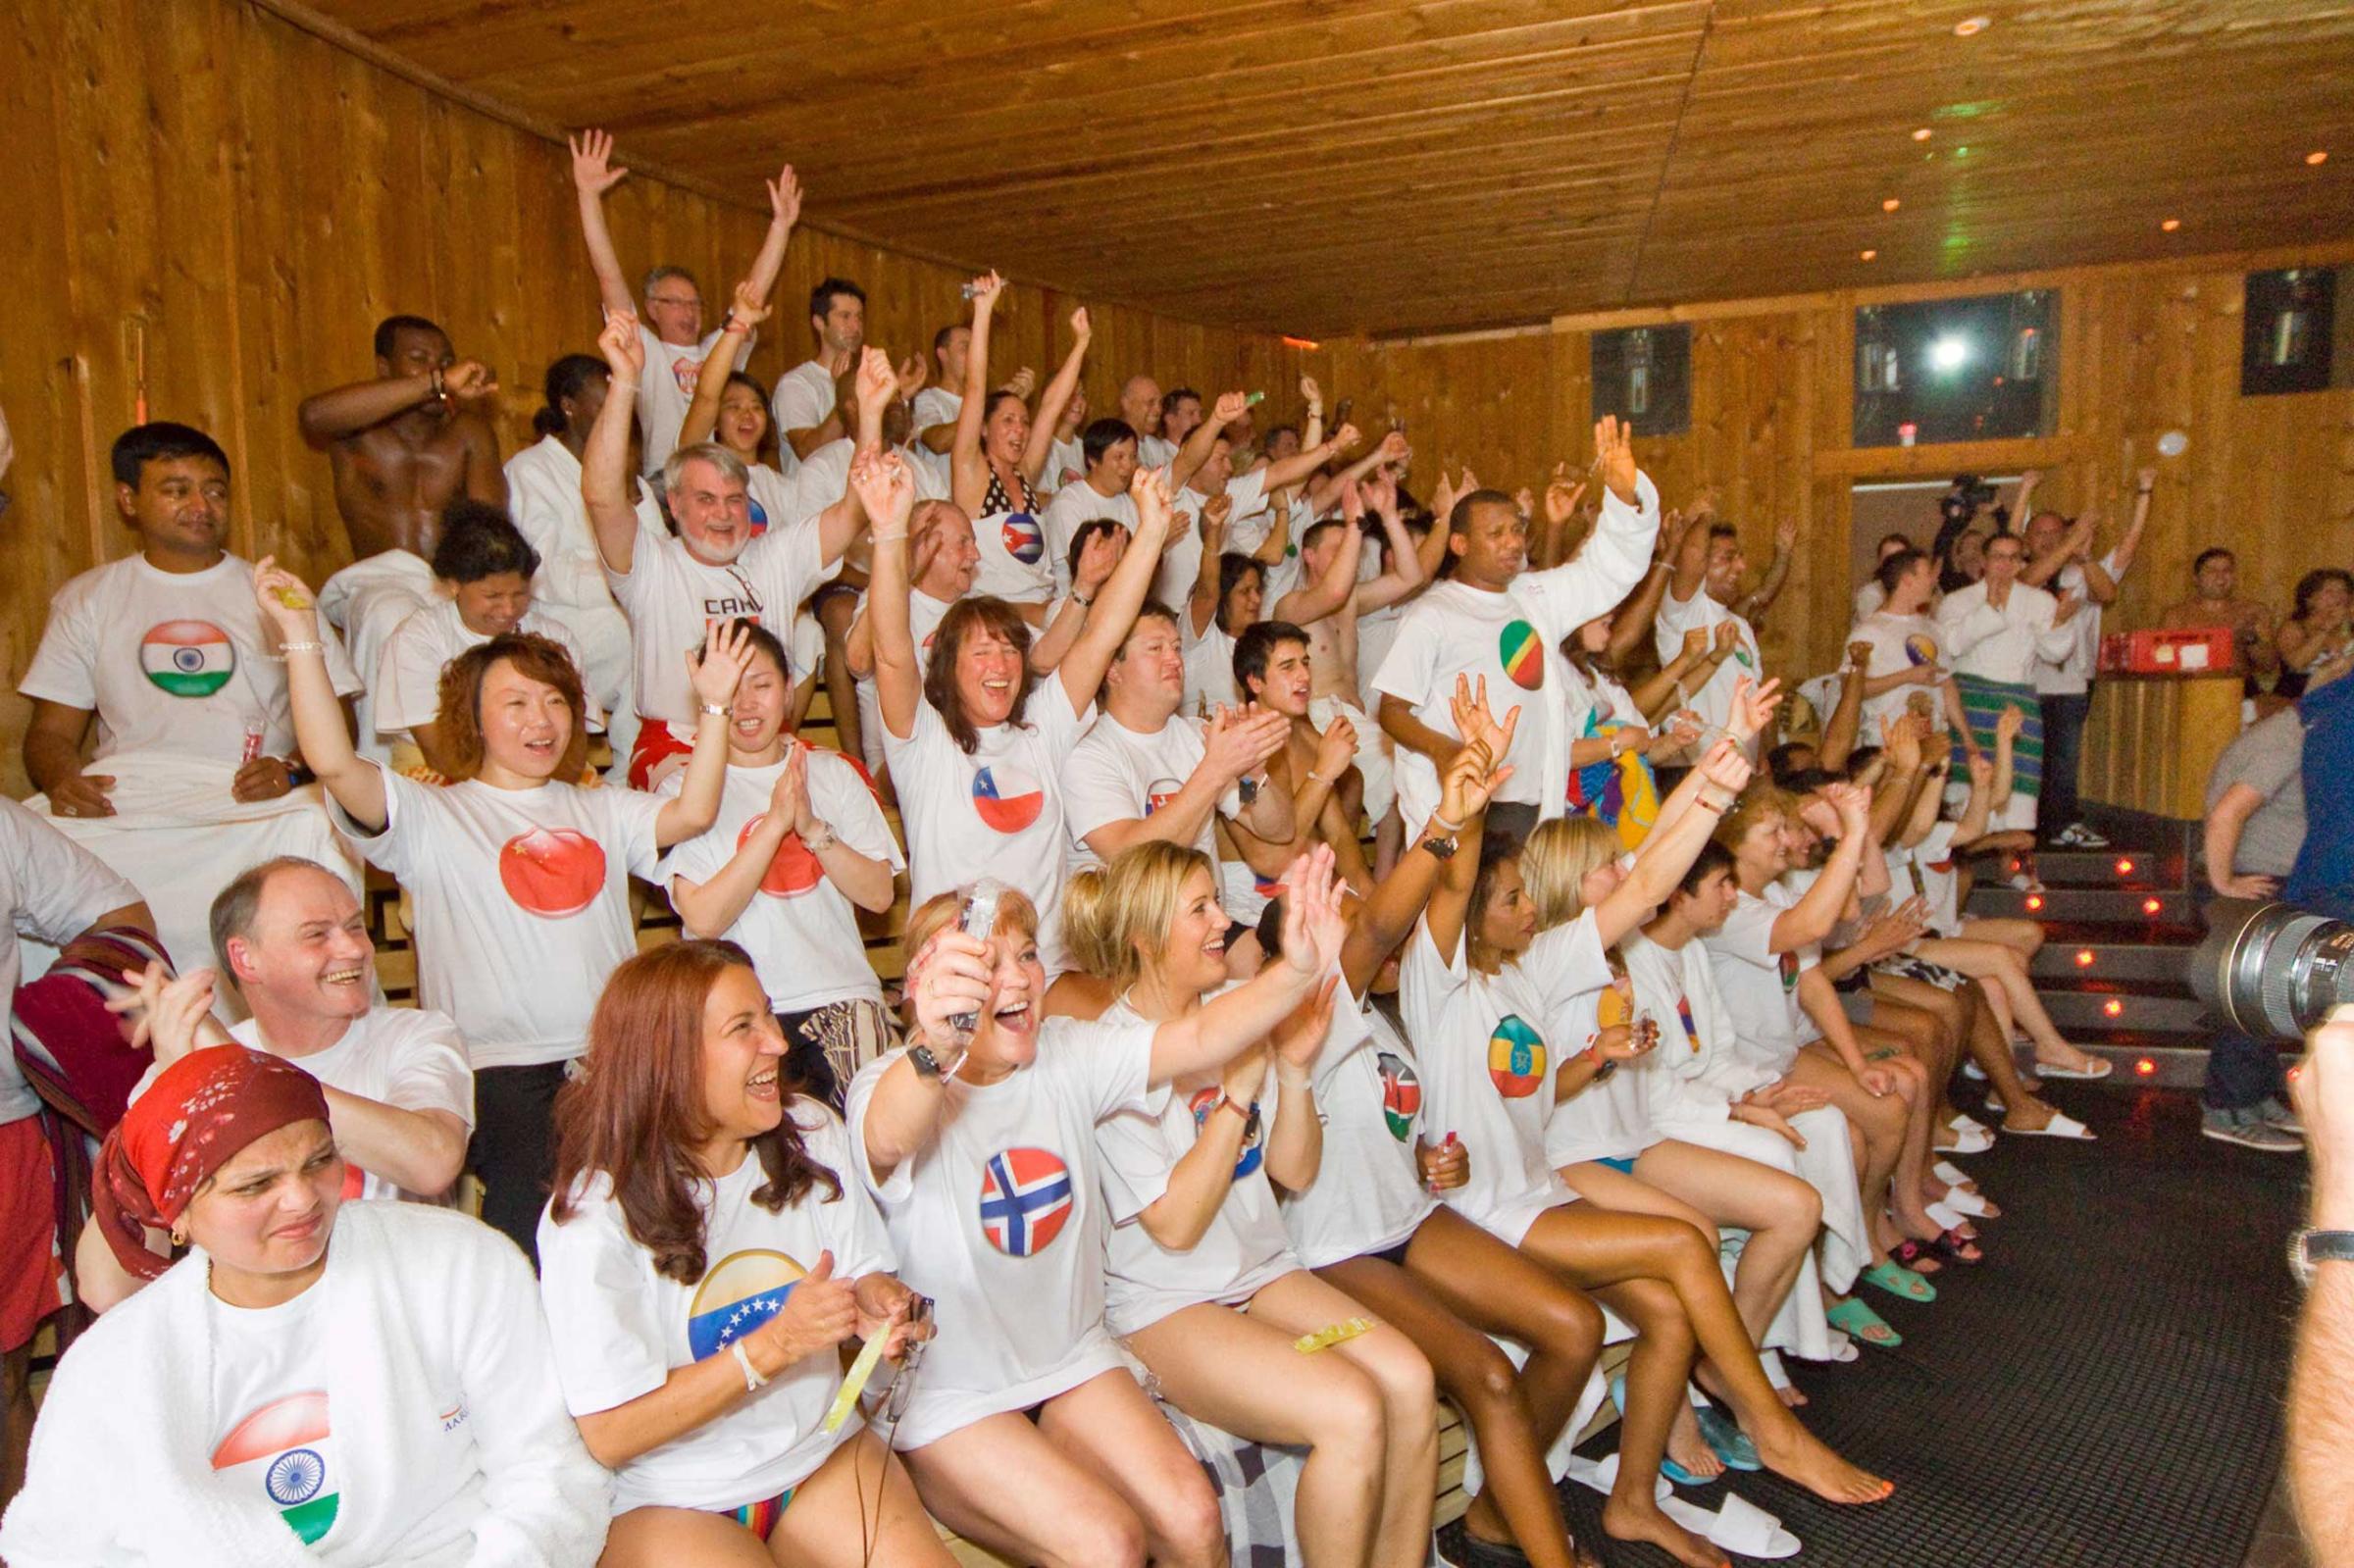 Record title: most nationalities in a saunaRecord to beat: 76Final result: 91 Additional info: On 18th November at 11.00 clock, Maximare in Hamm have had 91 different nationalities in a sauna in celebration of Guinness World Records Day)